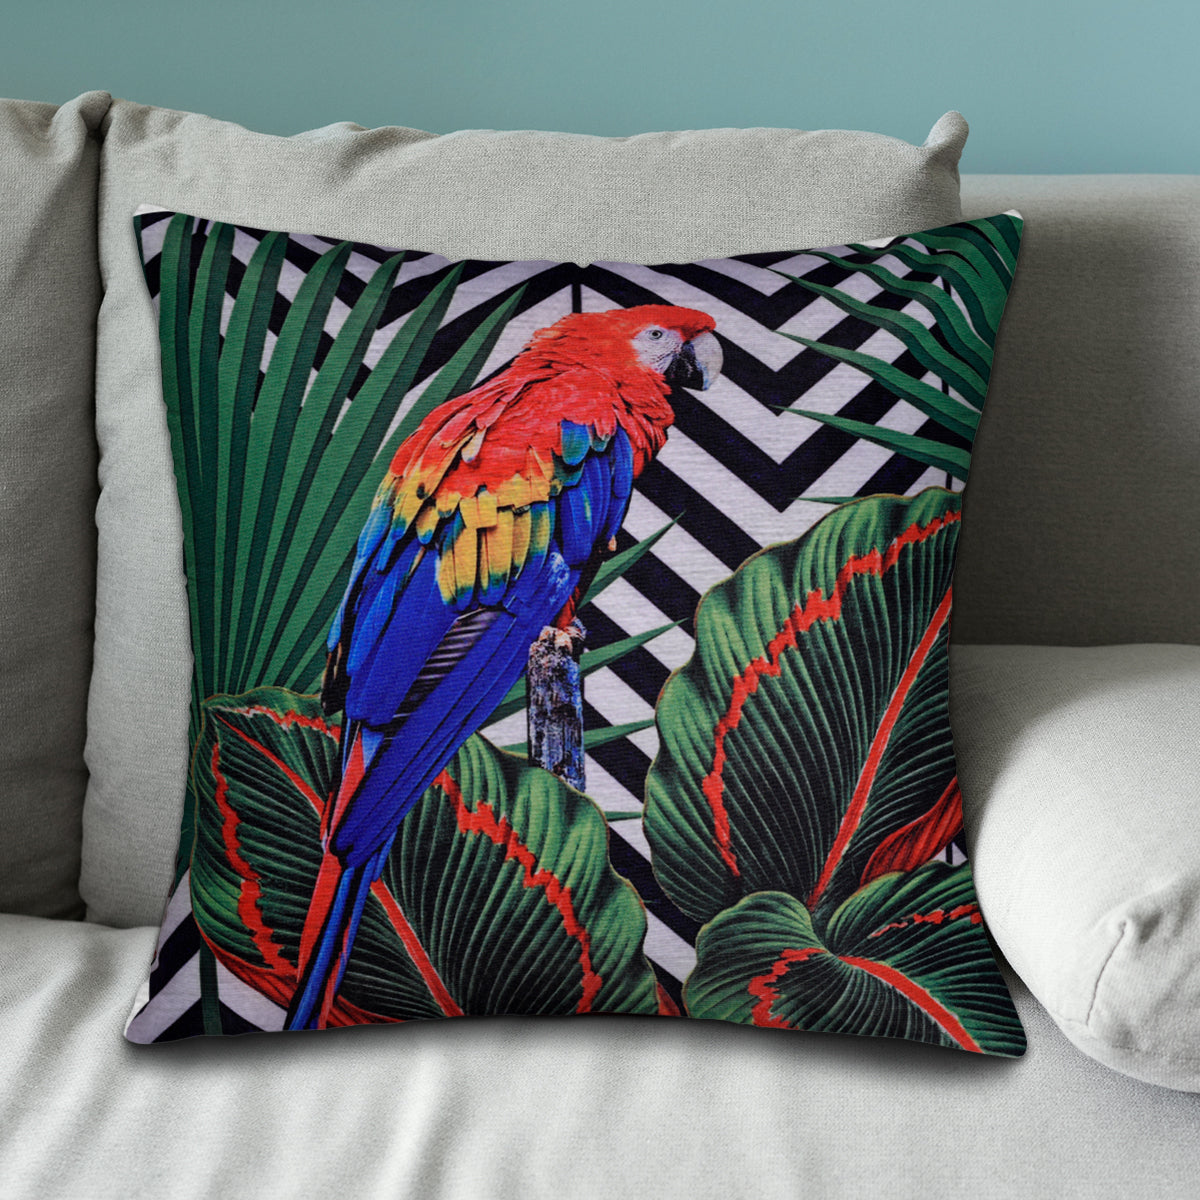 Parrots Printed Design Throw Pillow Covers - Set of 2 and 4, 18 x 18 Inches